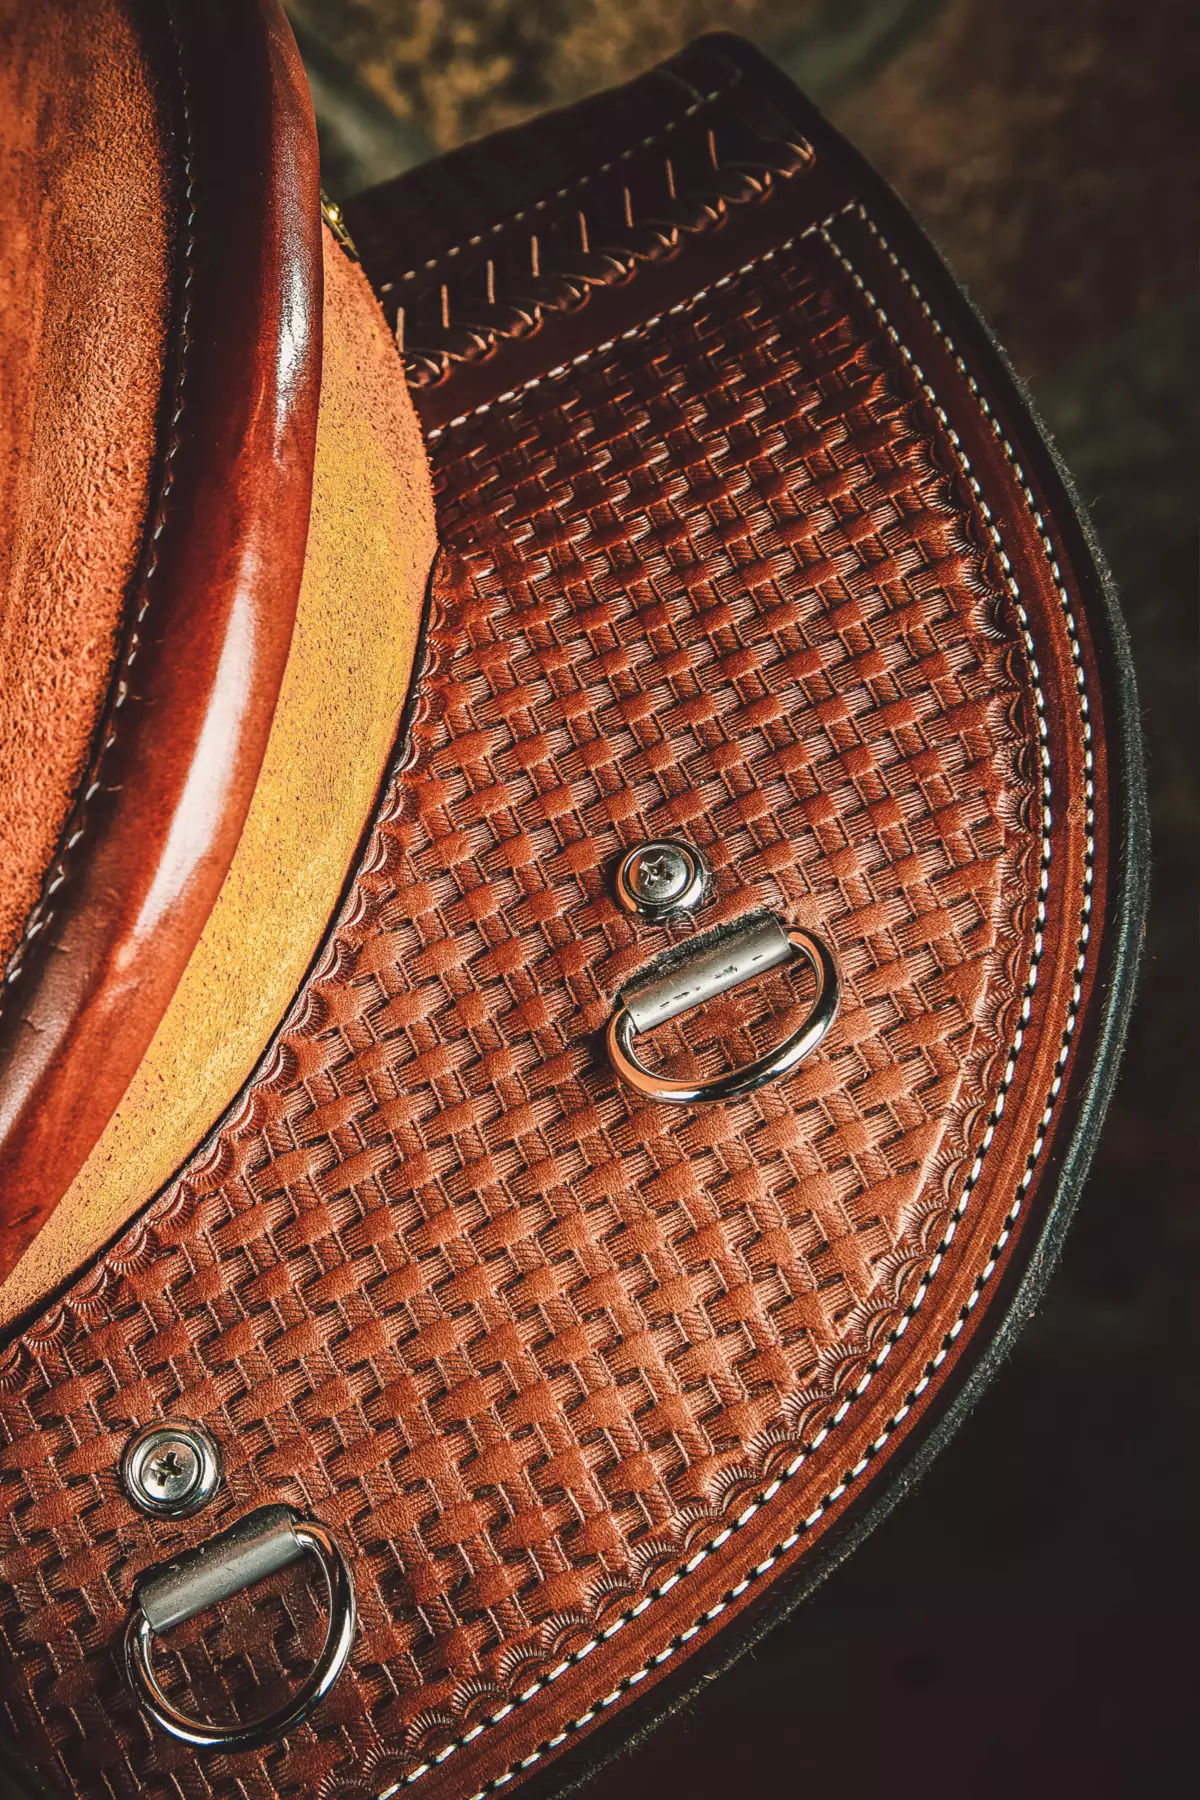 Saddle Features 10